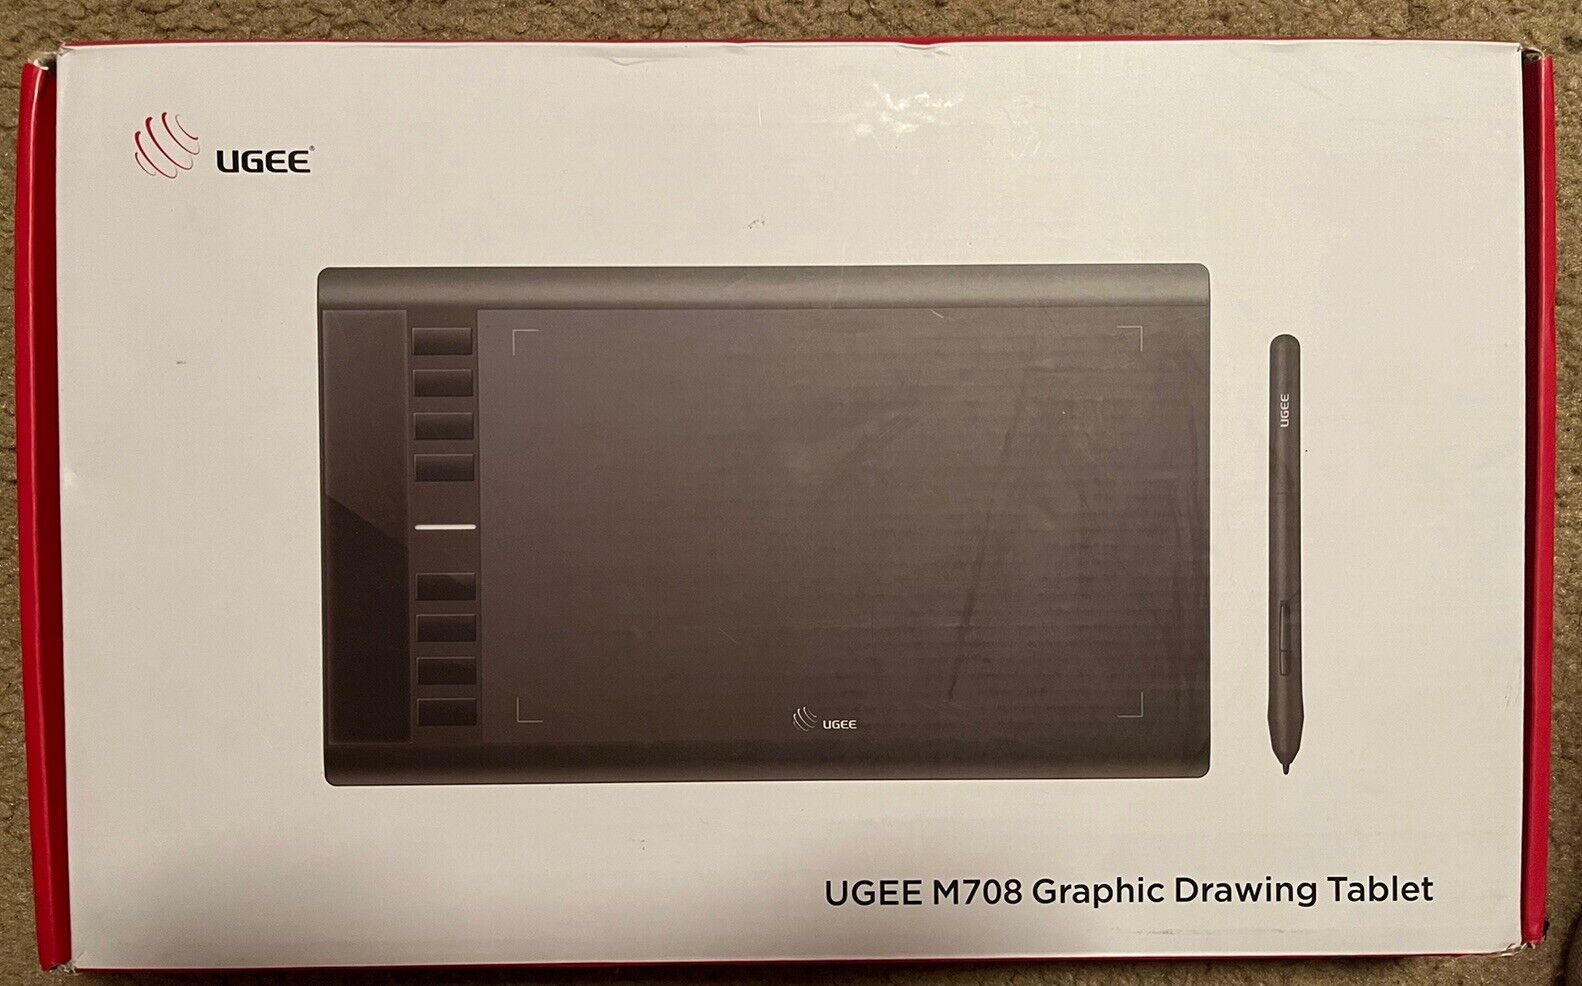 Ugee M708 Graphic Drawing Tablet, 10x6 in - Black (FBA_UG-M708-US)